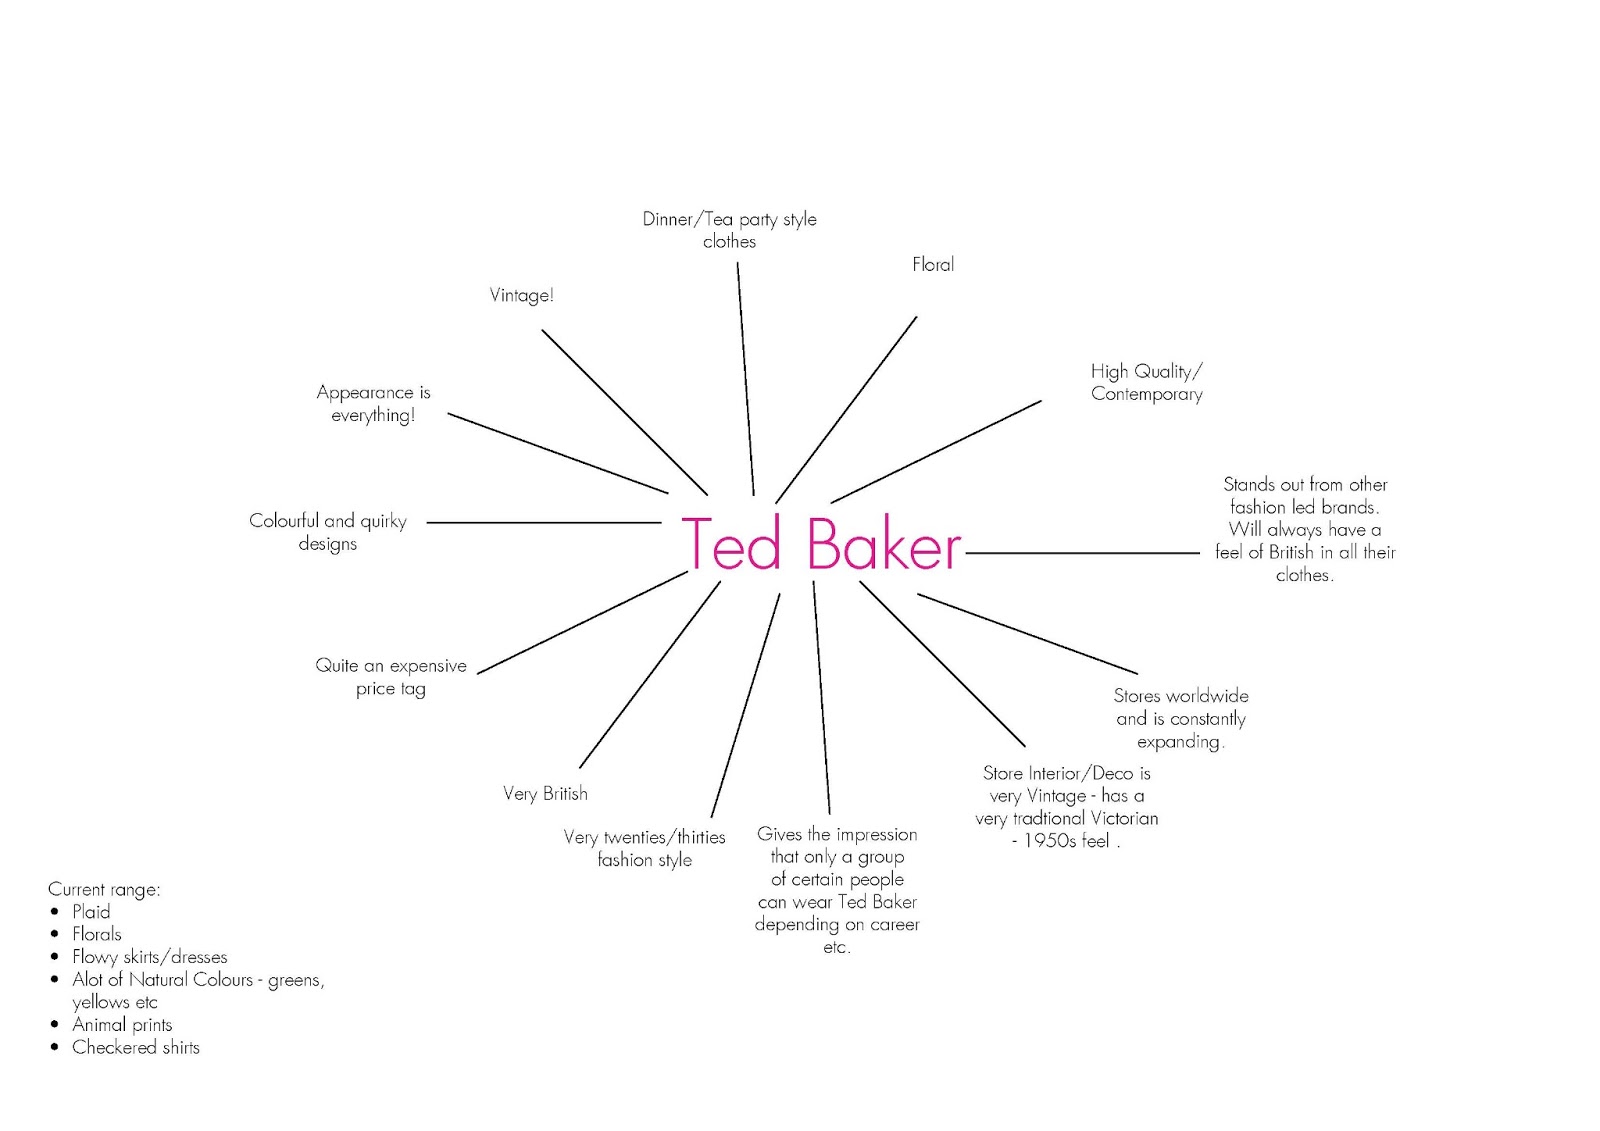 Who are Ted Baker competitors?